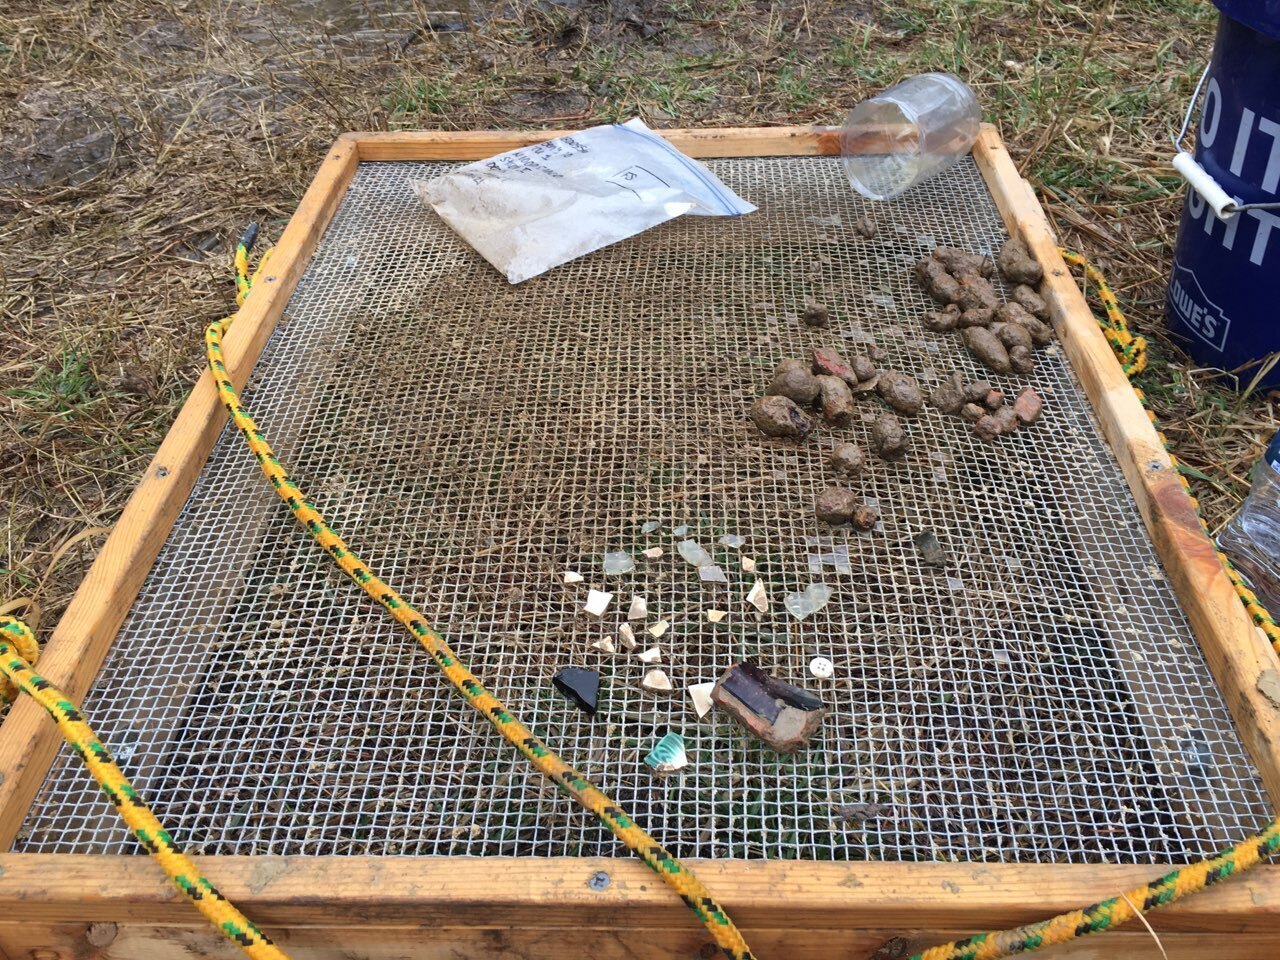 Various artifacts found at the site.  (Image: Maryland Department of Transportation)